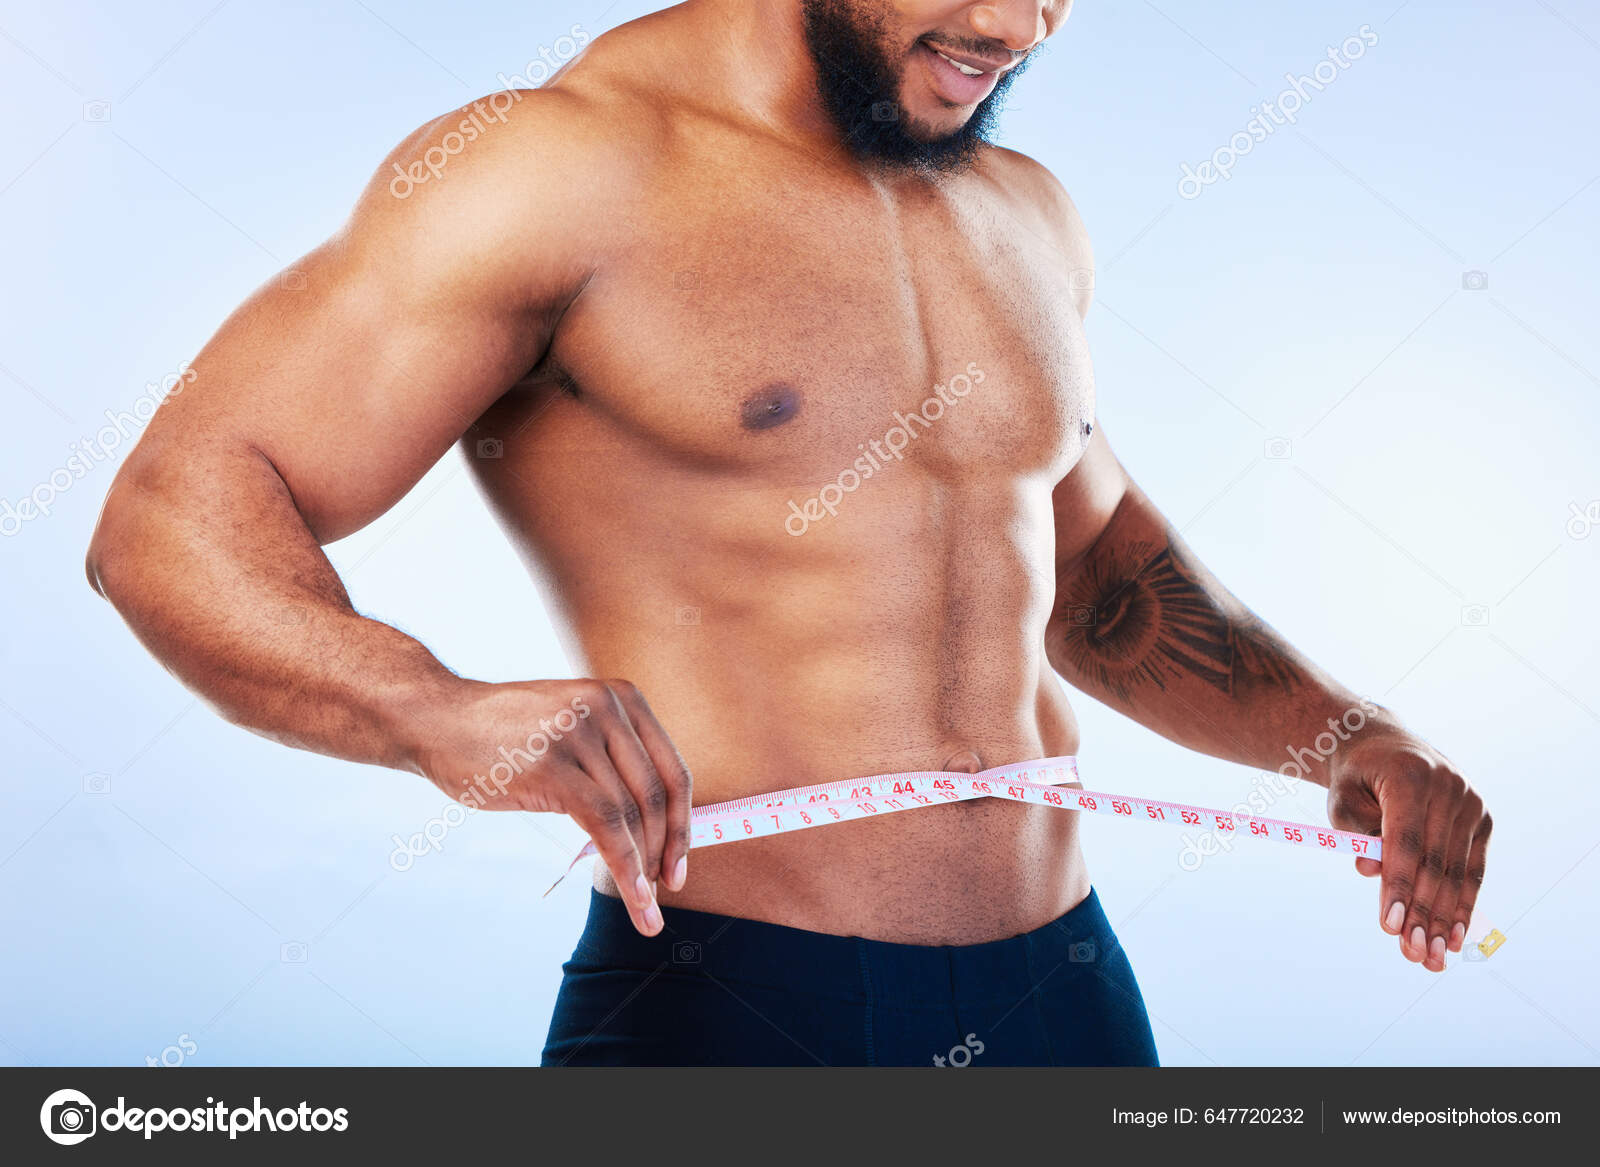 Premium Photo  Man body or measuring tape on waist on studio background  for weight loss management fat control or bmi and diet wellness fitness  model sports athlete or coach with tape